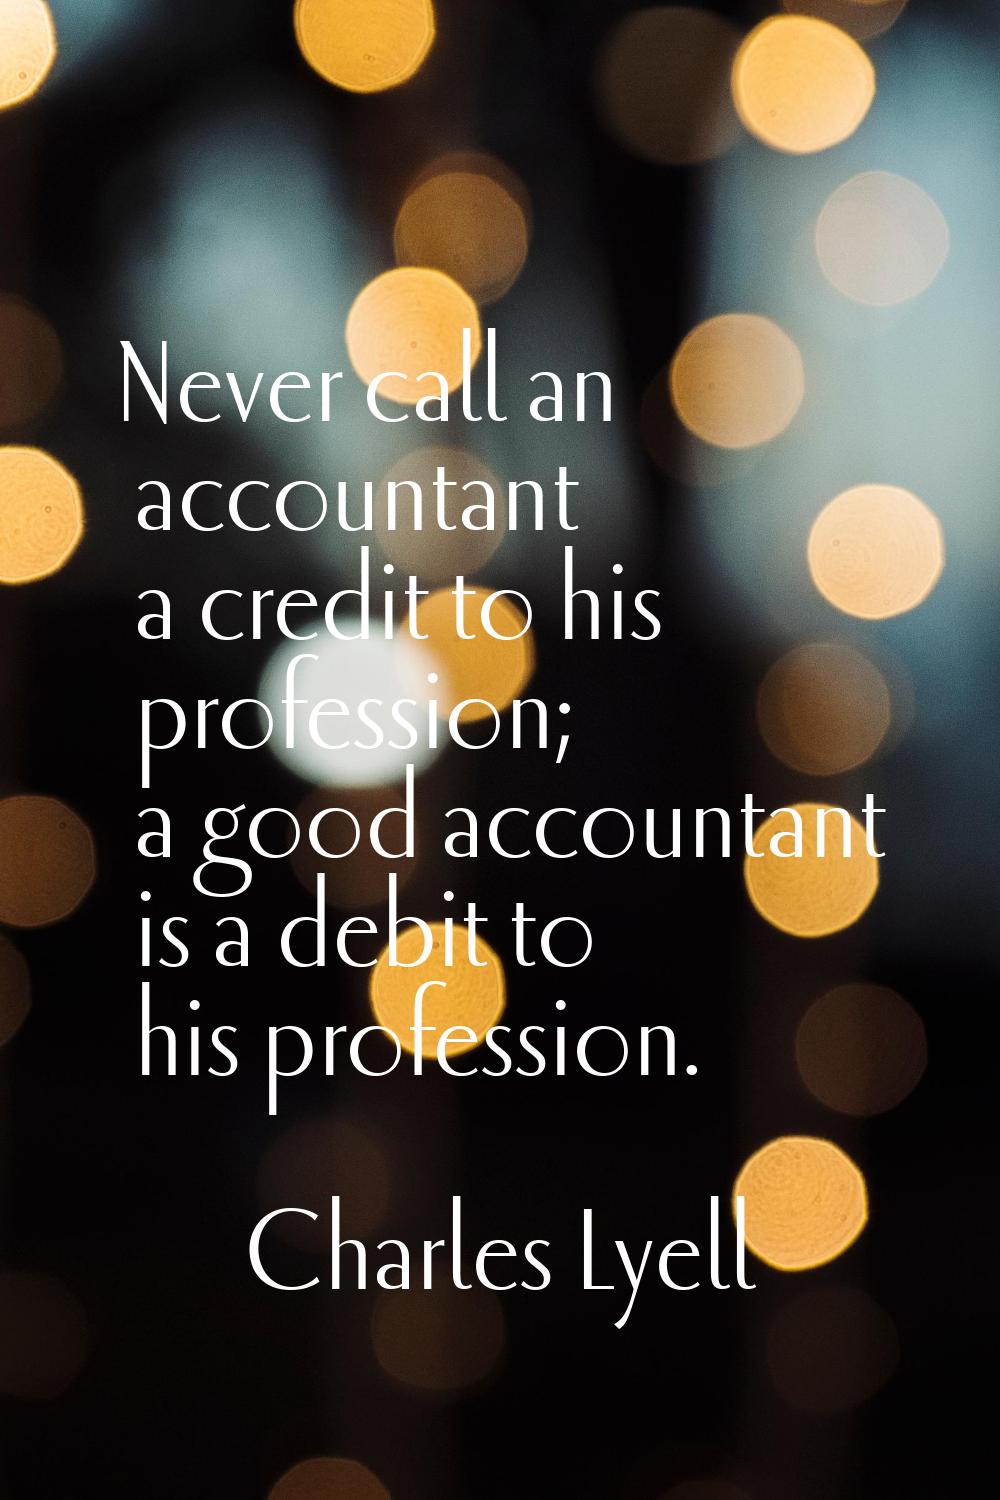 Never call an accountant a credit to his profession; a good accountant is a debit to his profession